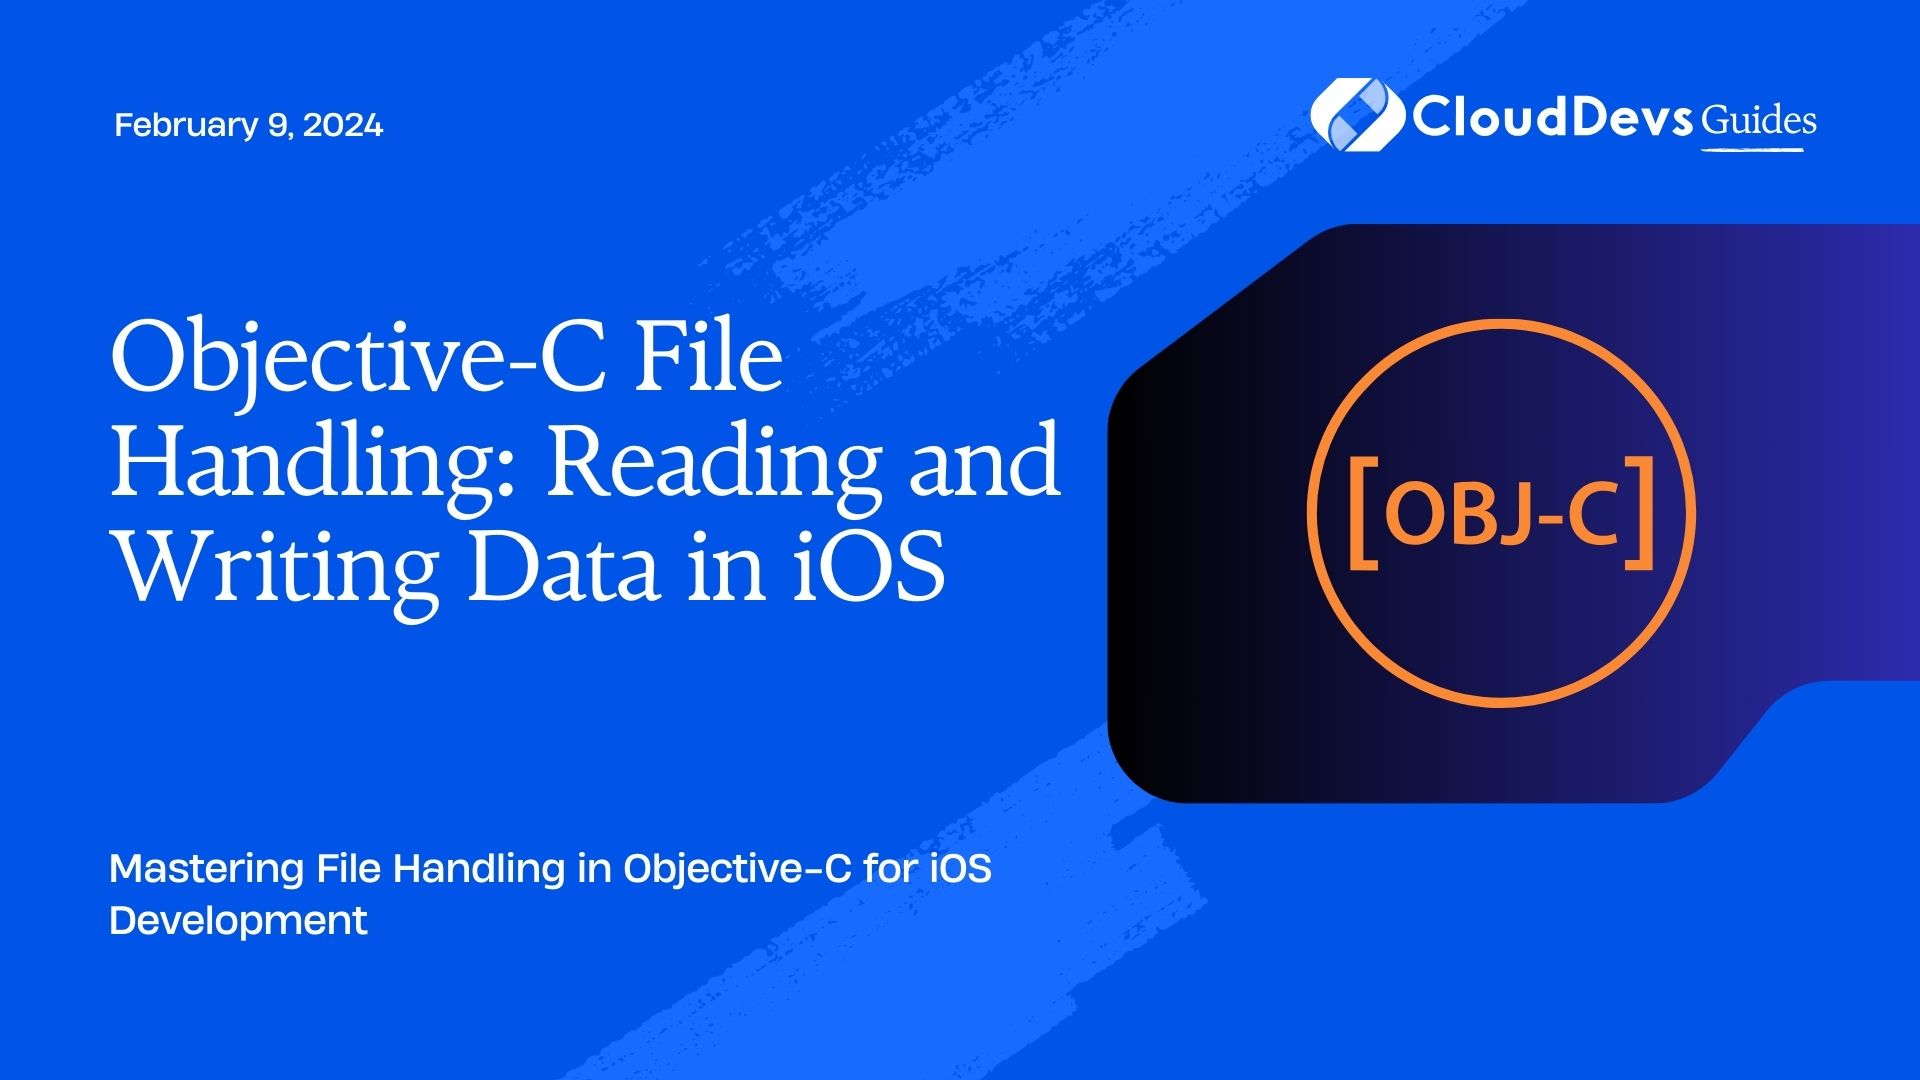 Objective-C File Handling: Reading and Writing Data in iOS